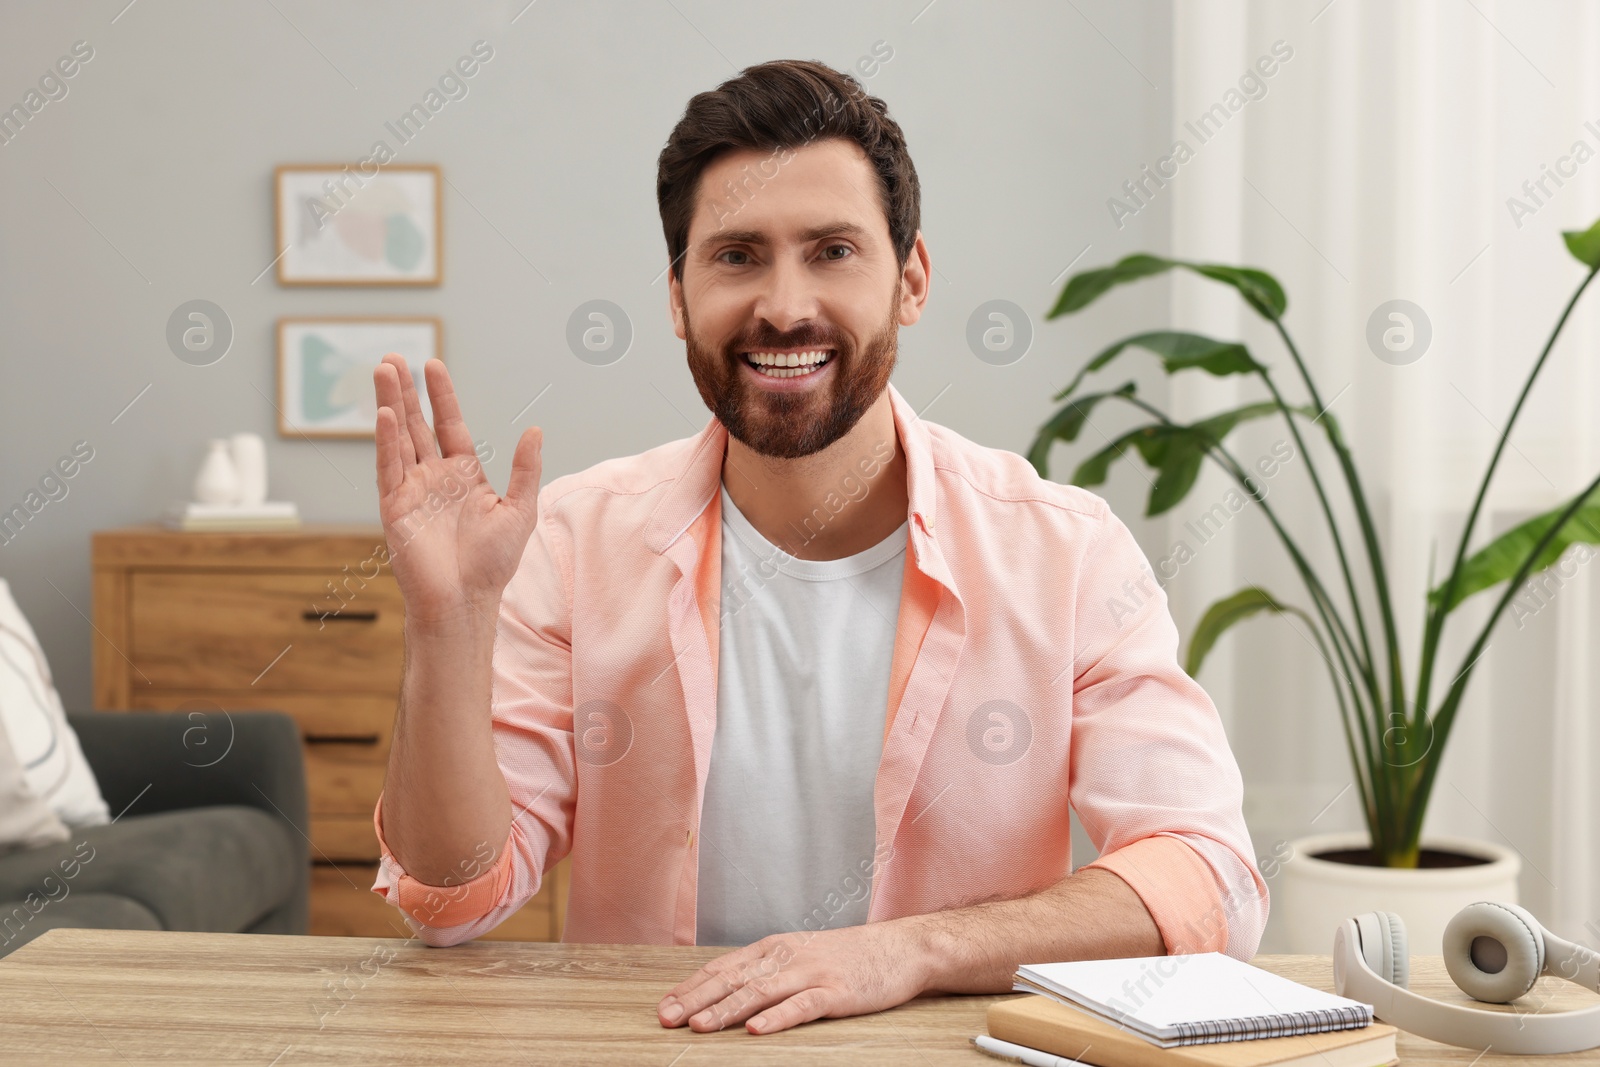 Photo of Stylish man greeting someone at wooden table indoors